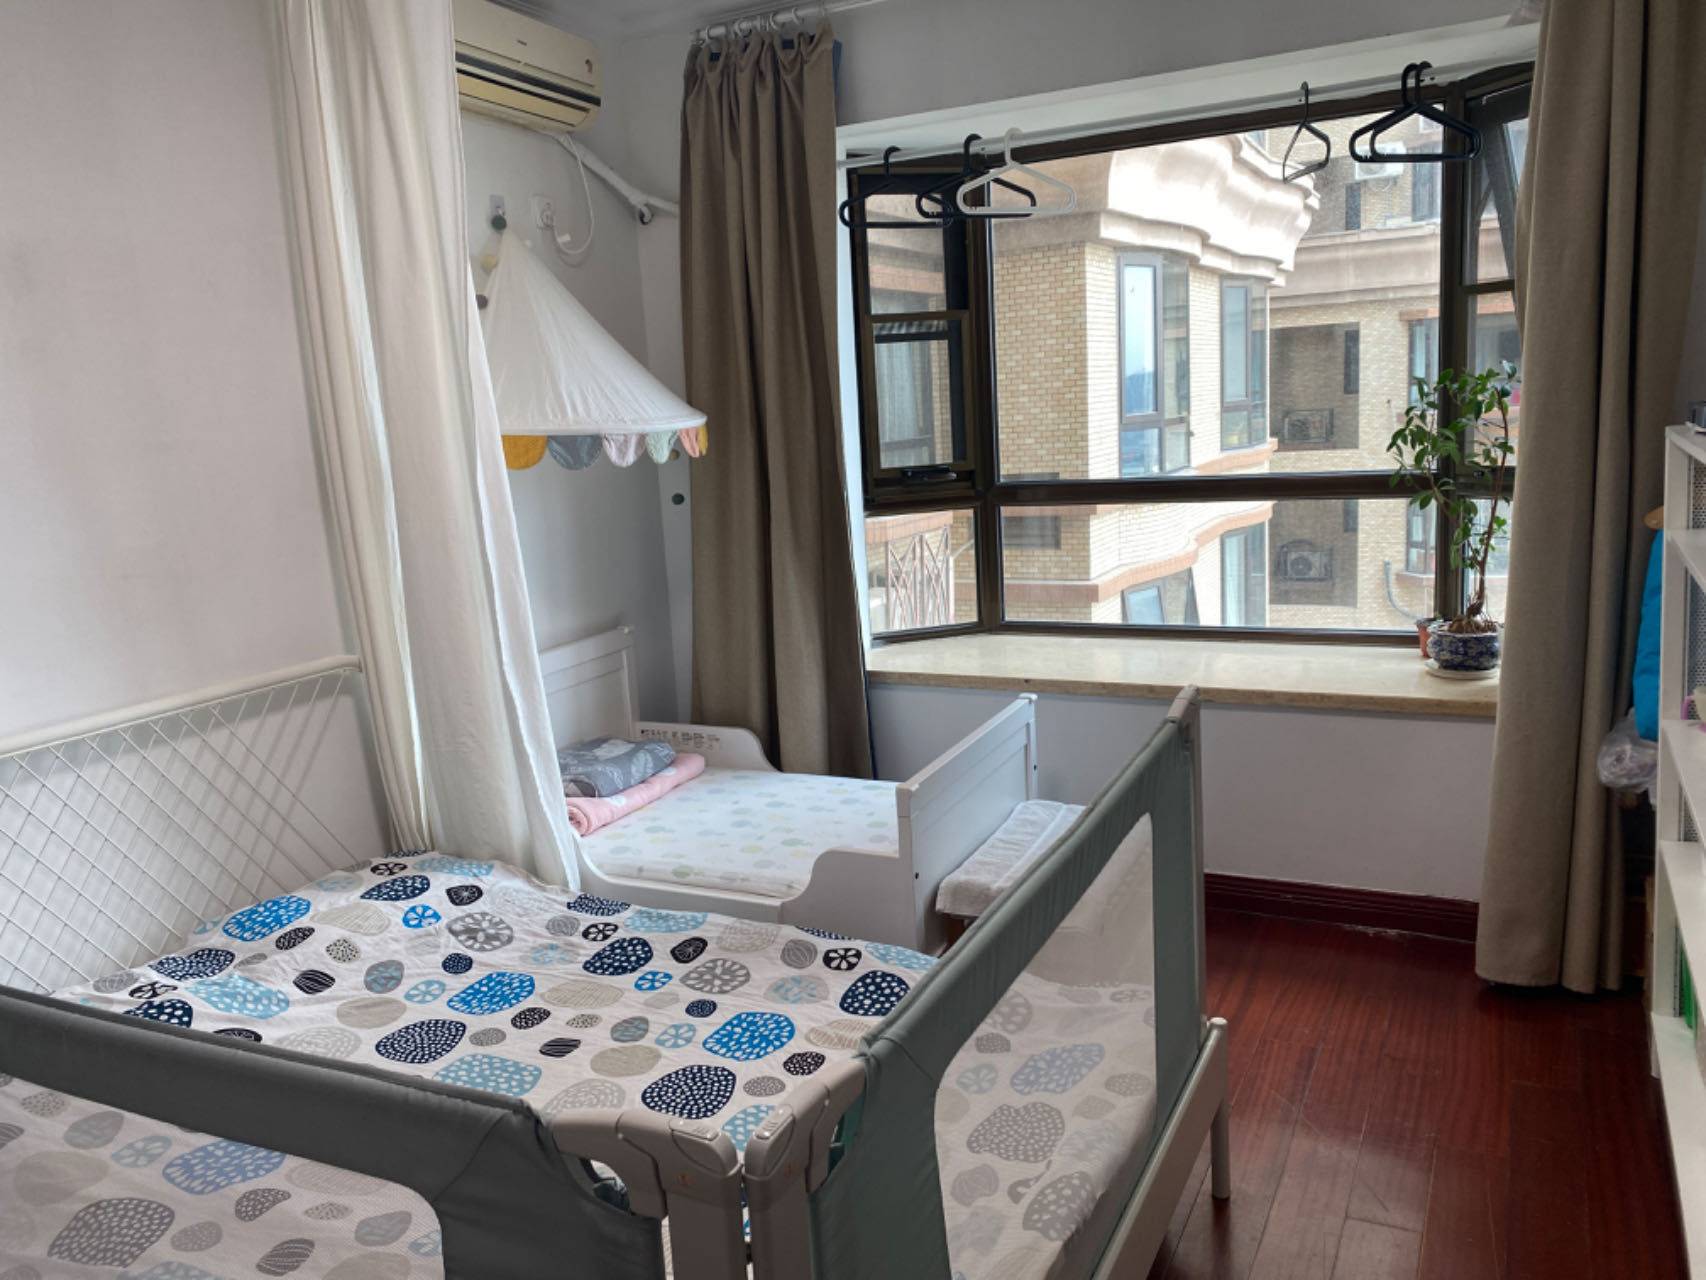 Beijing-Chaoyang-Cozy Home,Clean&Comfy,No Gender Limit,Hustle & Bustle,“Friends”,Chilled,LGBTQ Friendly